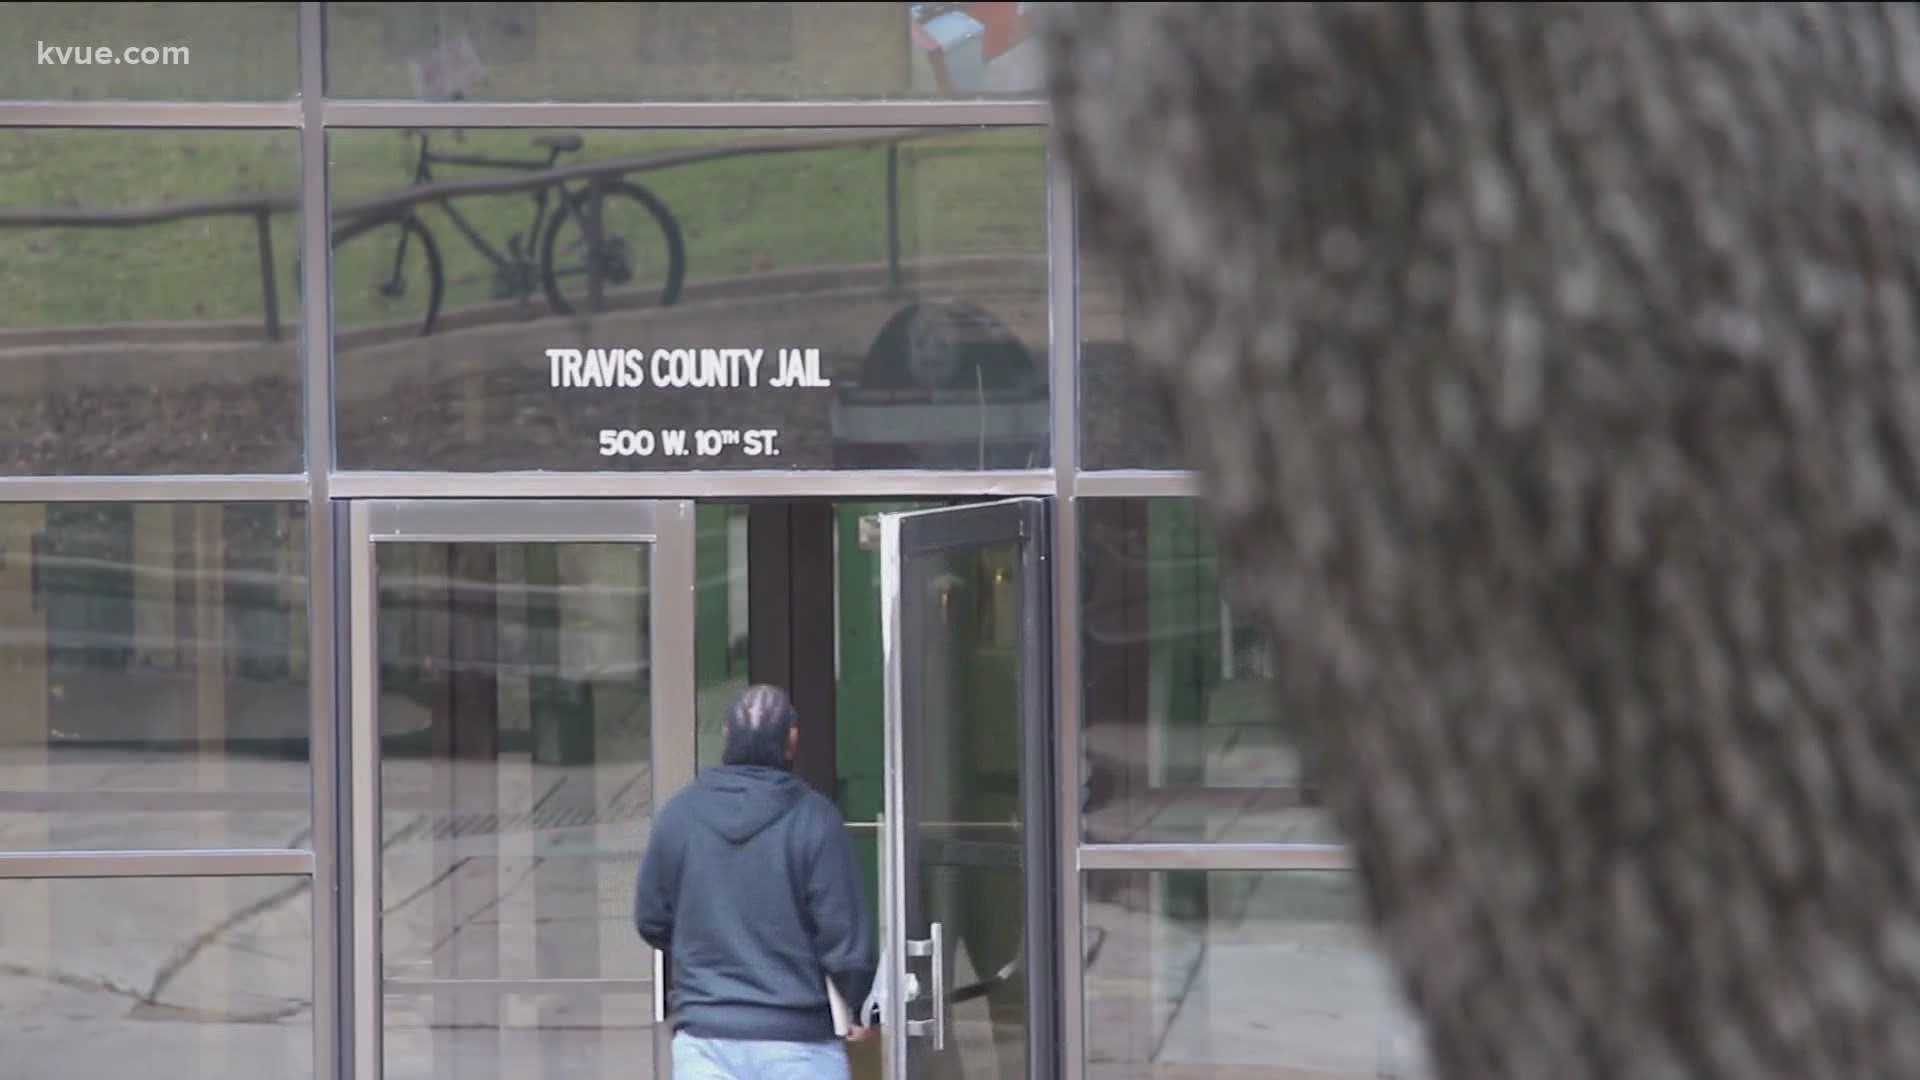 There are more than 1,700 inmates in the Travis County Jail and about 1,800 employees.